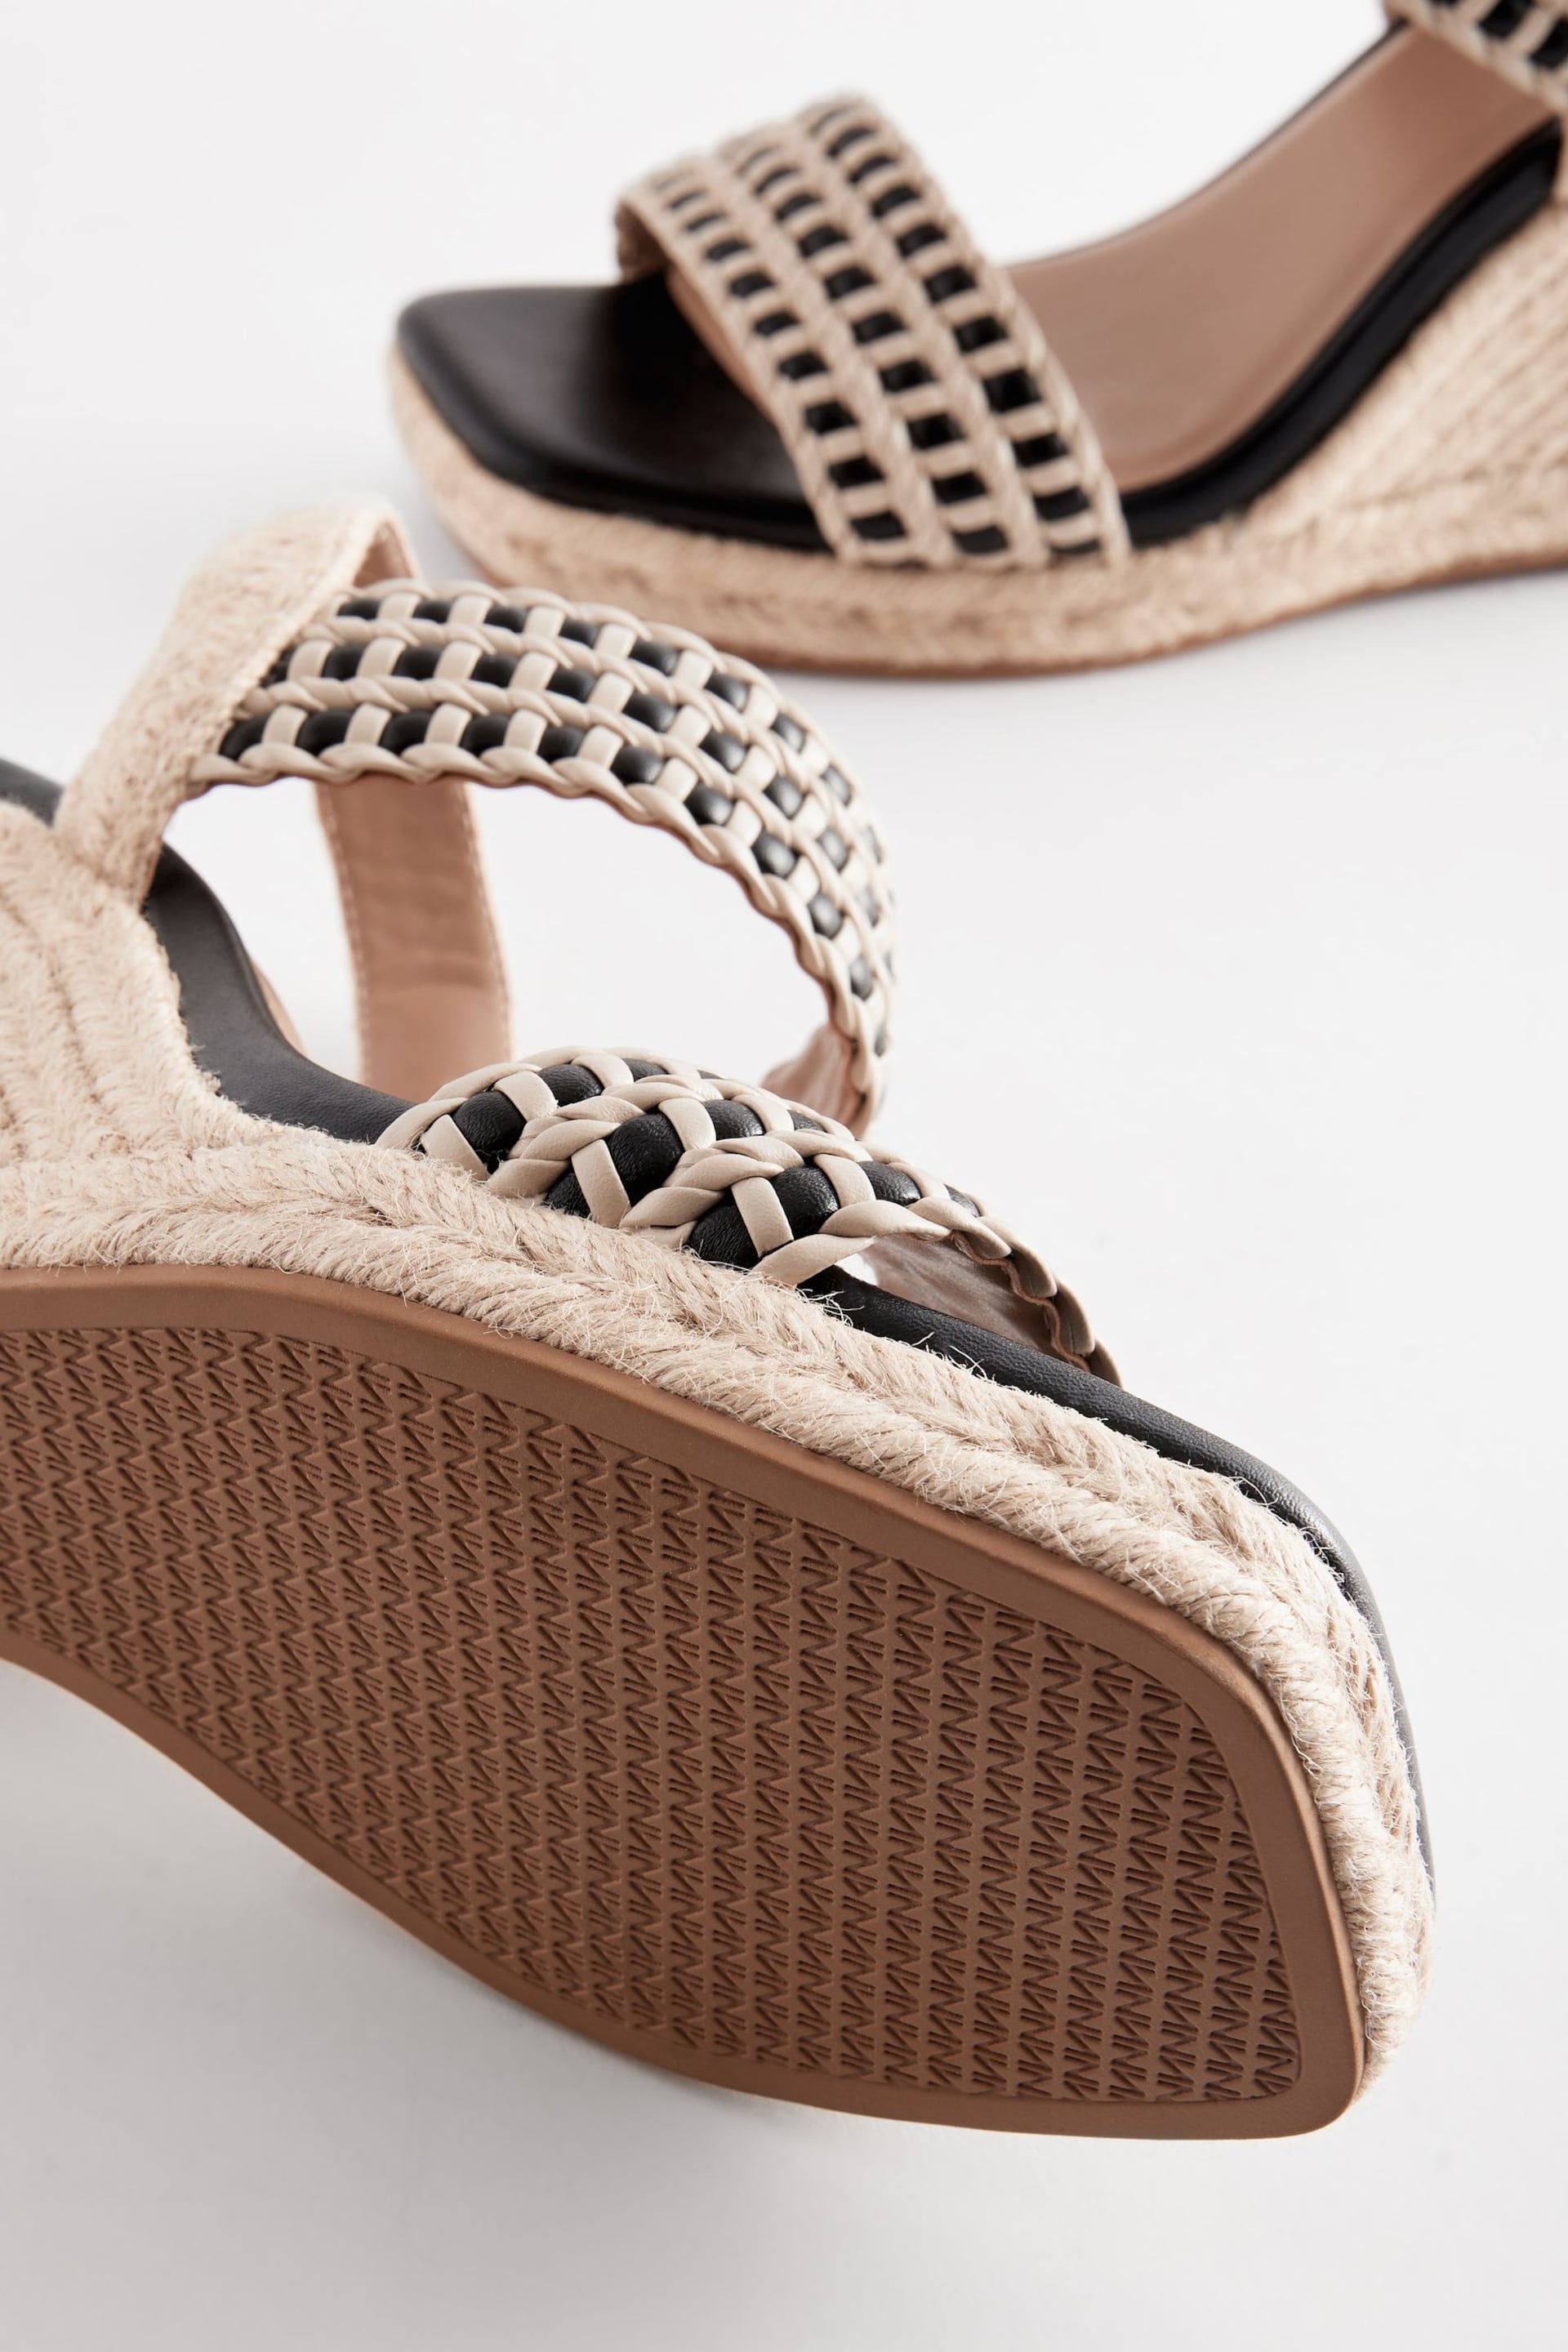 Monochrome Forever Comfort® Square Toe Weave Wedges - Image 8 of 8